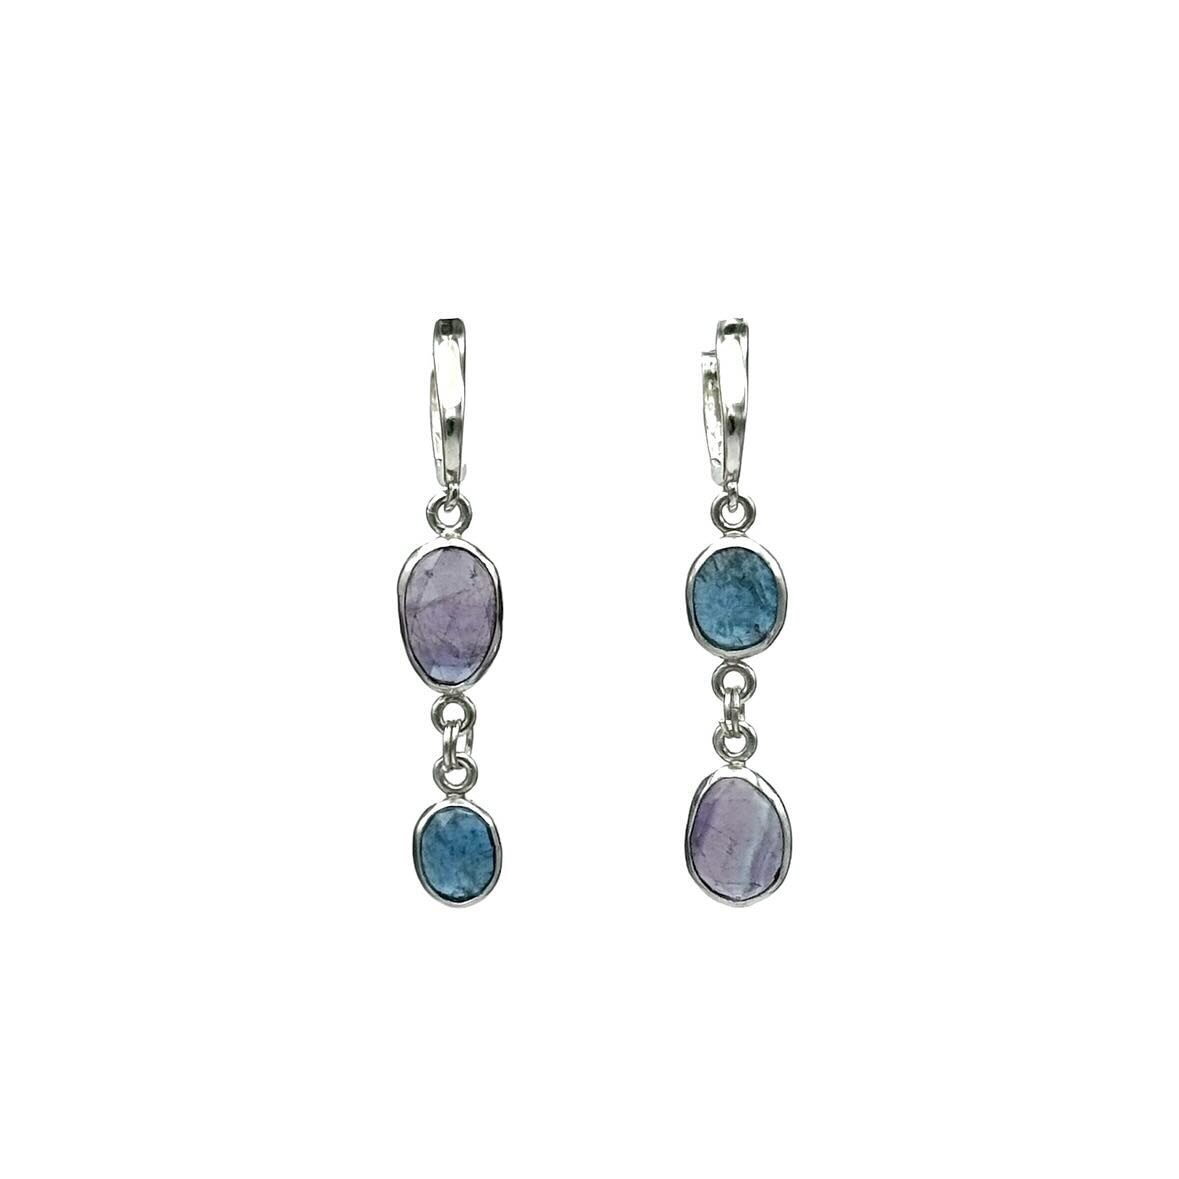 Another asymmetrical rose-cut fluorite and neon blue kyanite gemstone earrings.

About 2&rdquo; in length including hinged closures. Sterling silver polished honed finish.